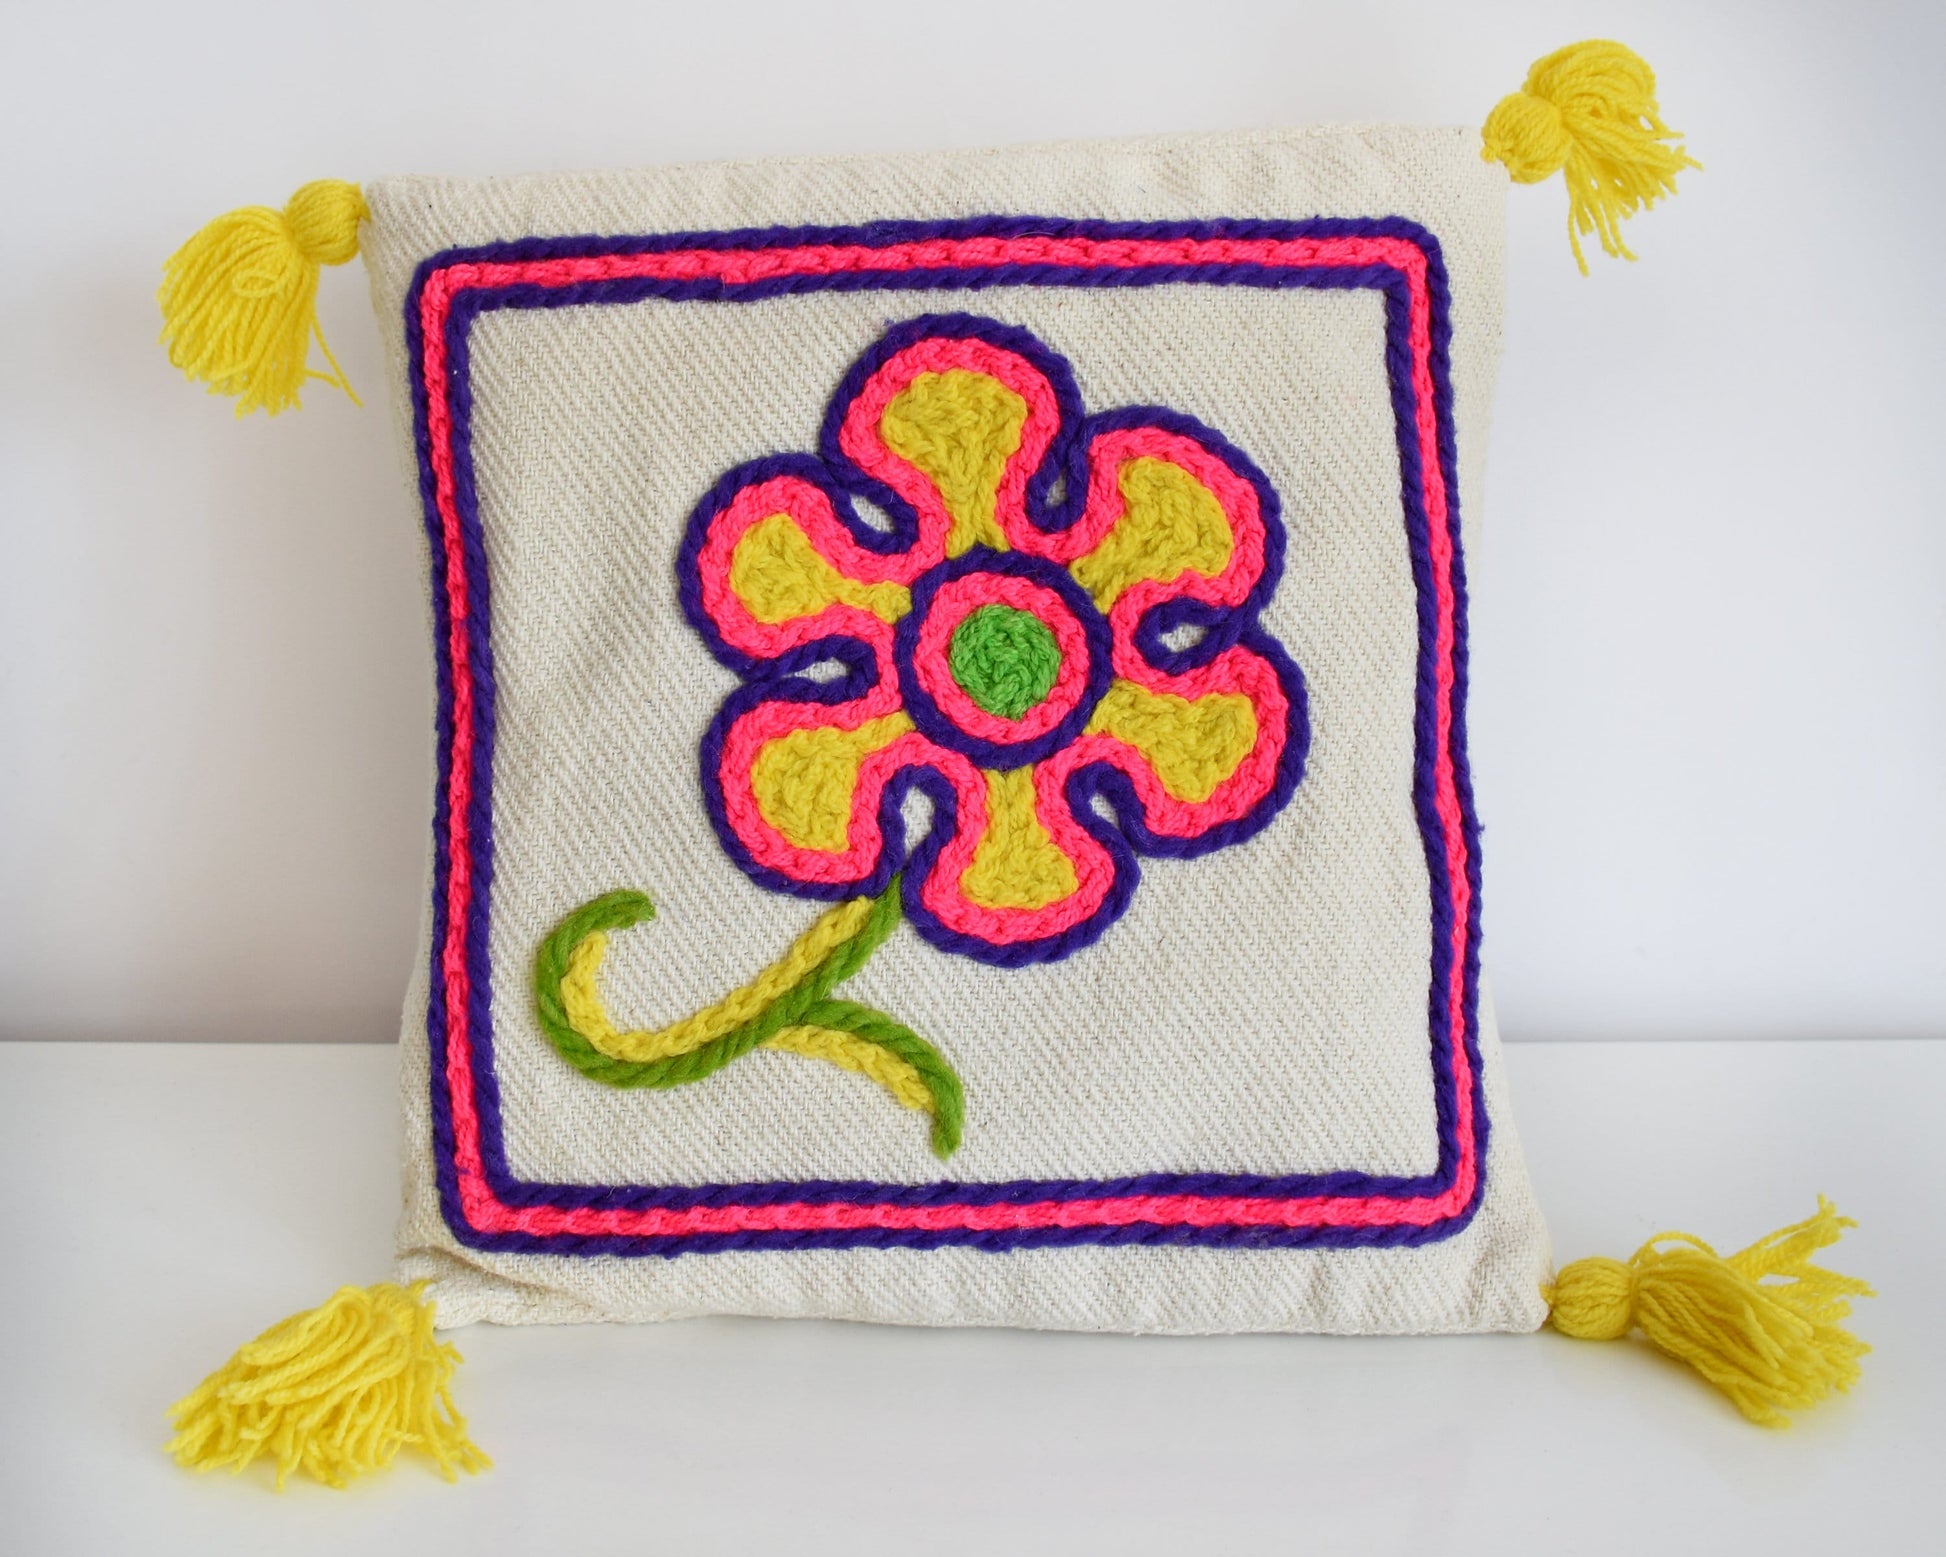 A vintage crewel embroidered floral pillow with yellow tassels on a table.